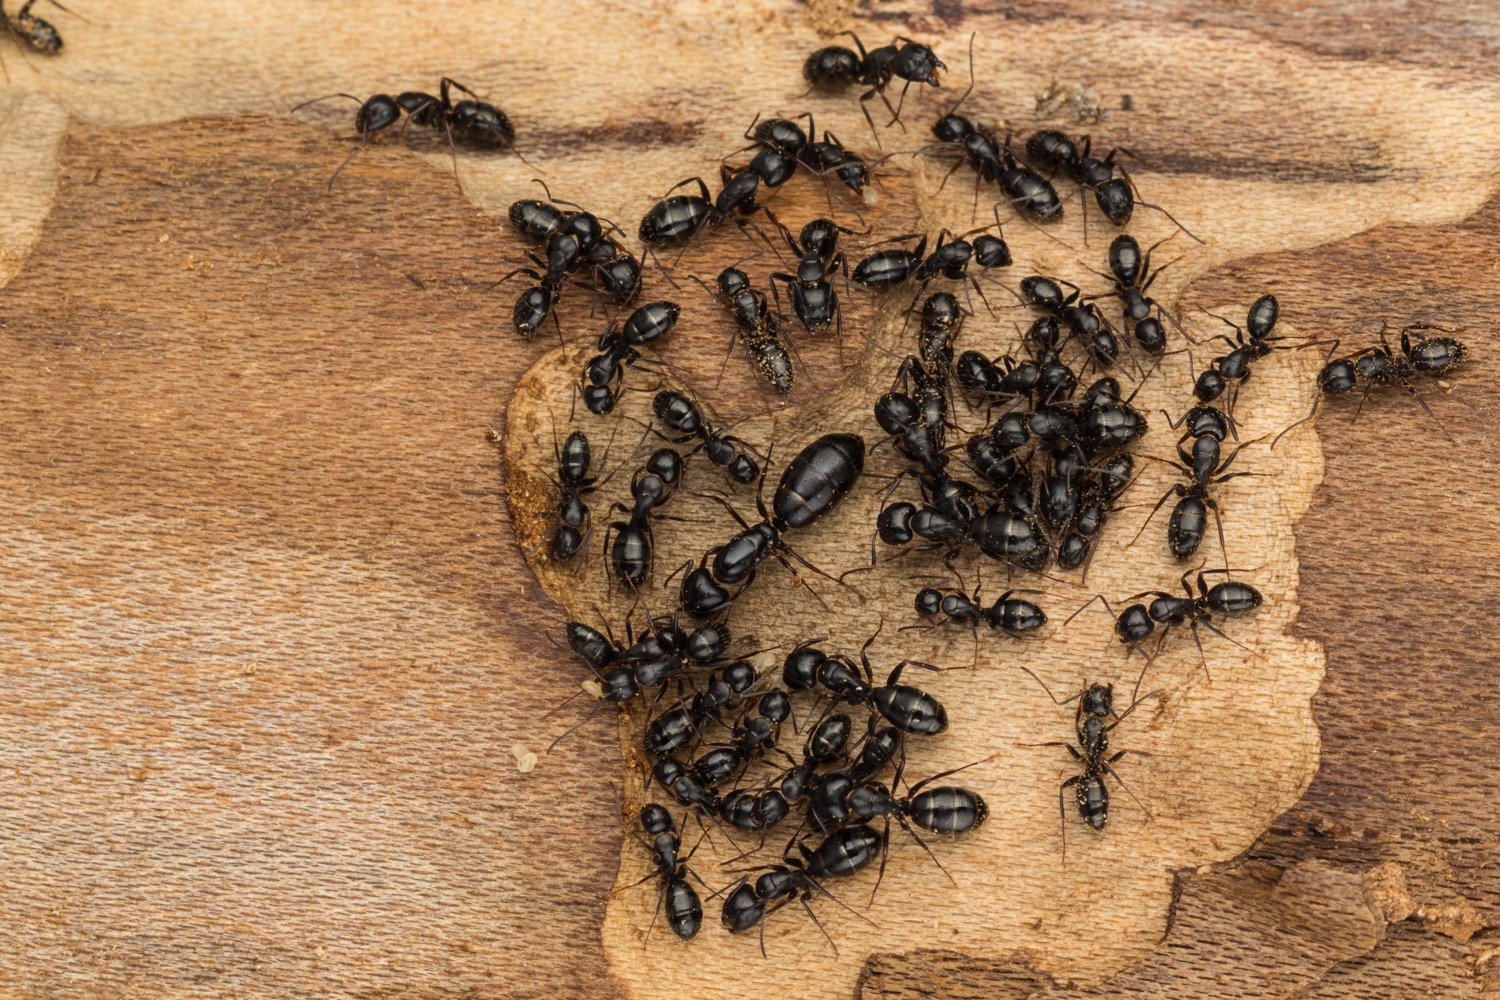 Expert Ant Control & Removal in Jamestown, NY